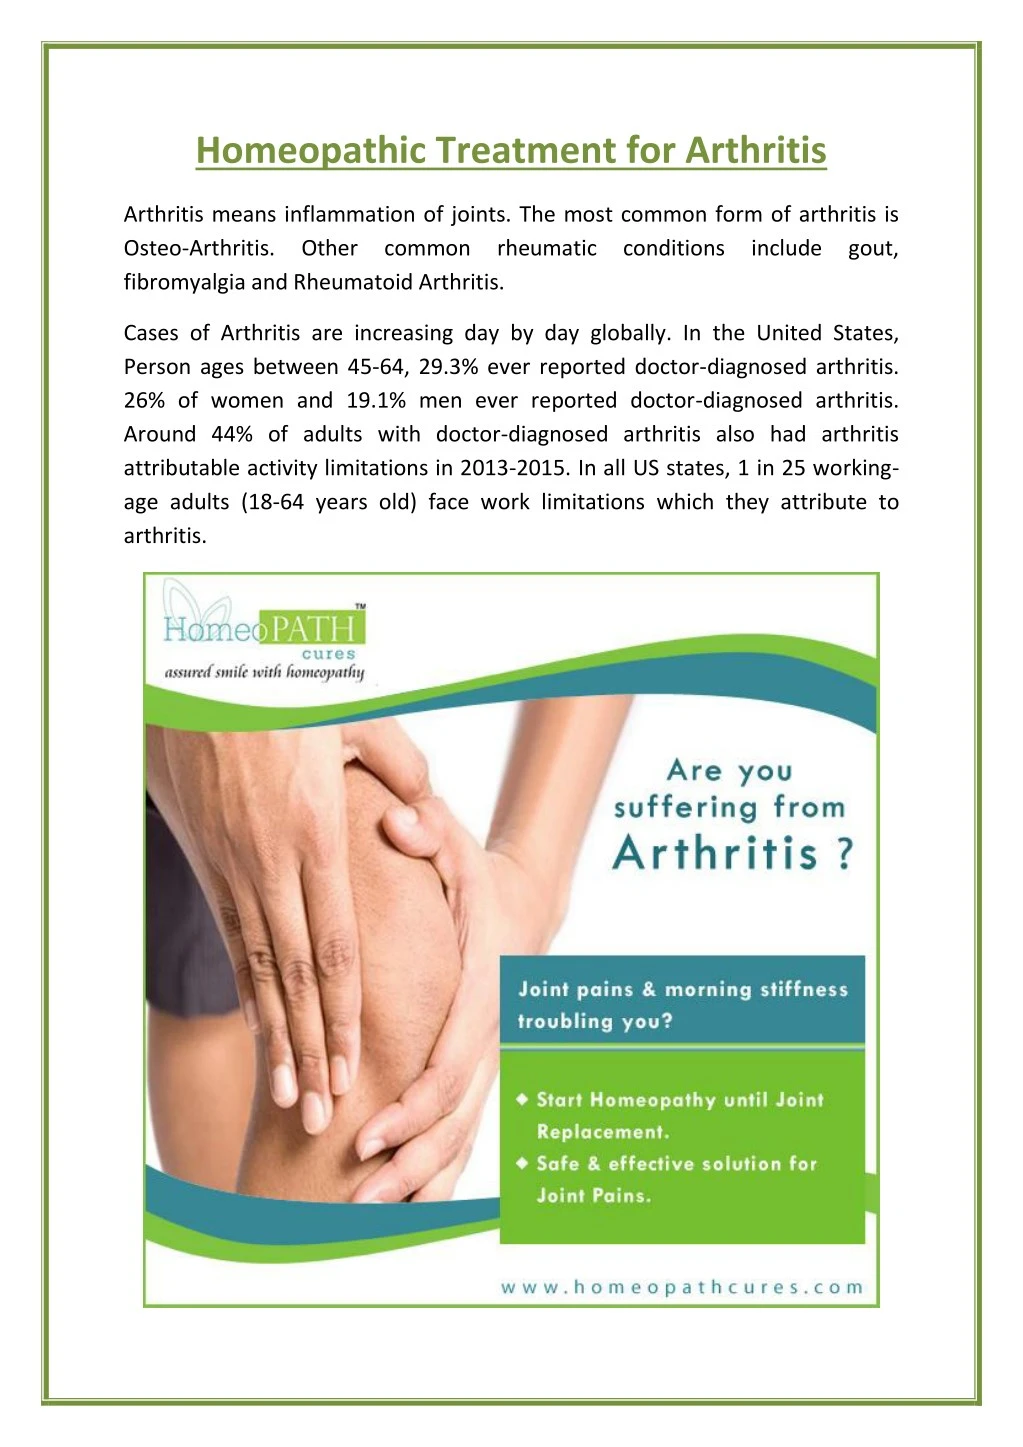 homeopathic treatment for arthritis